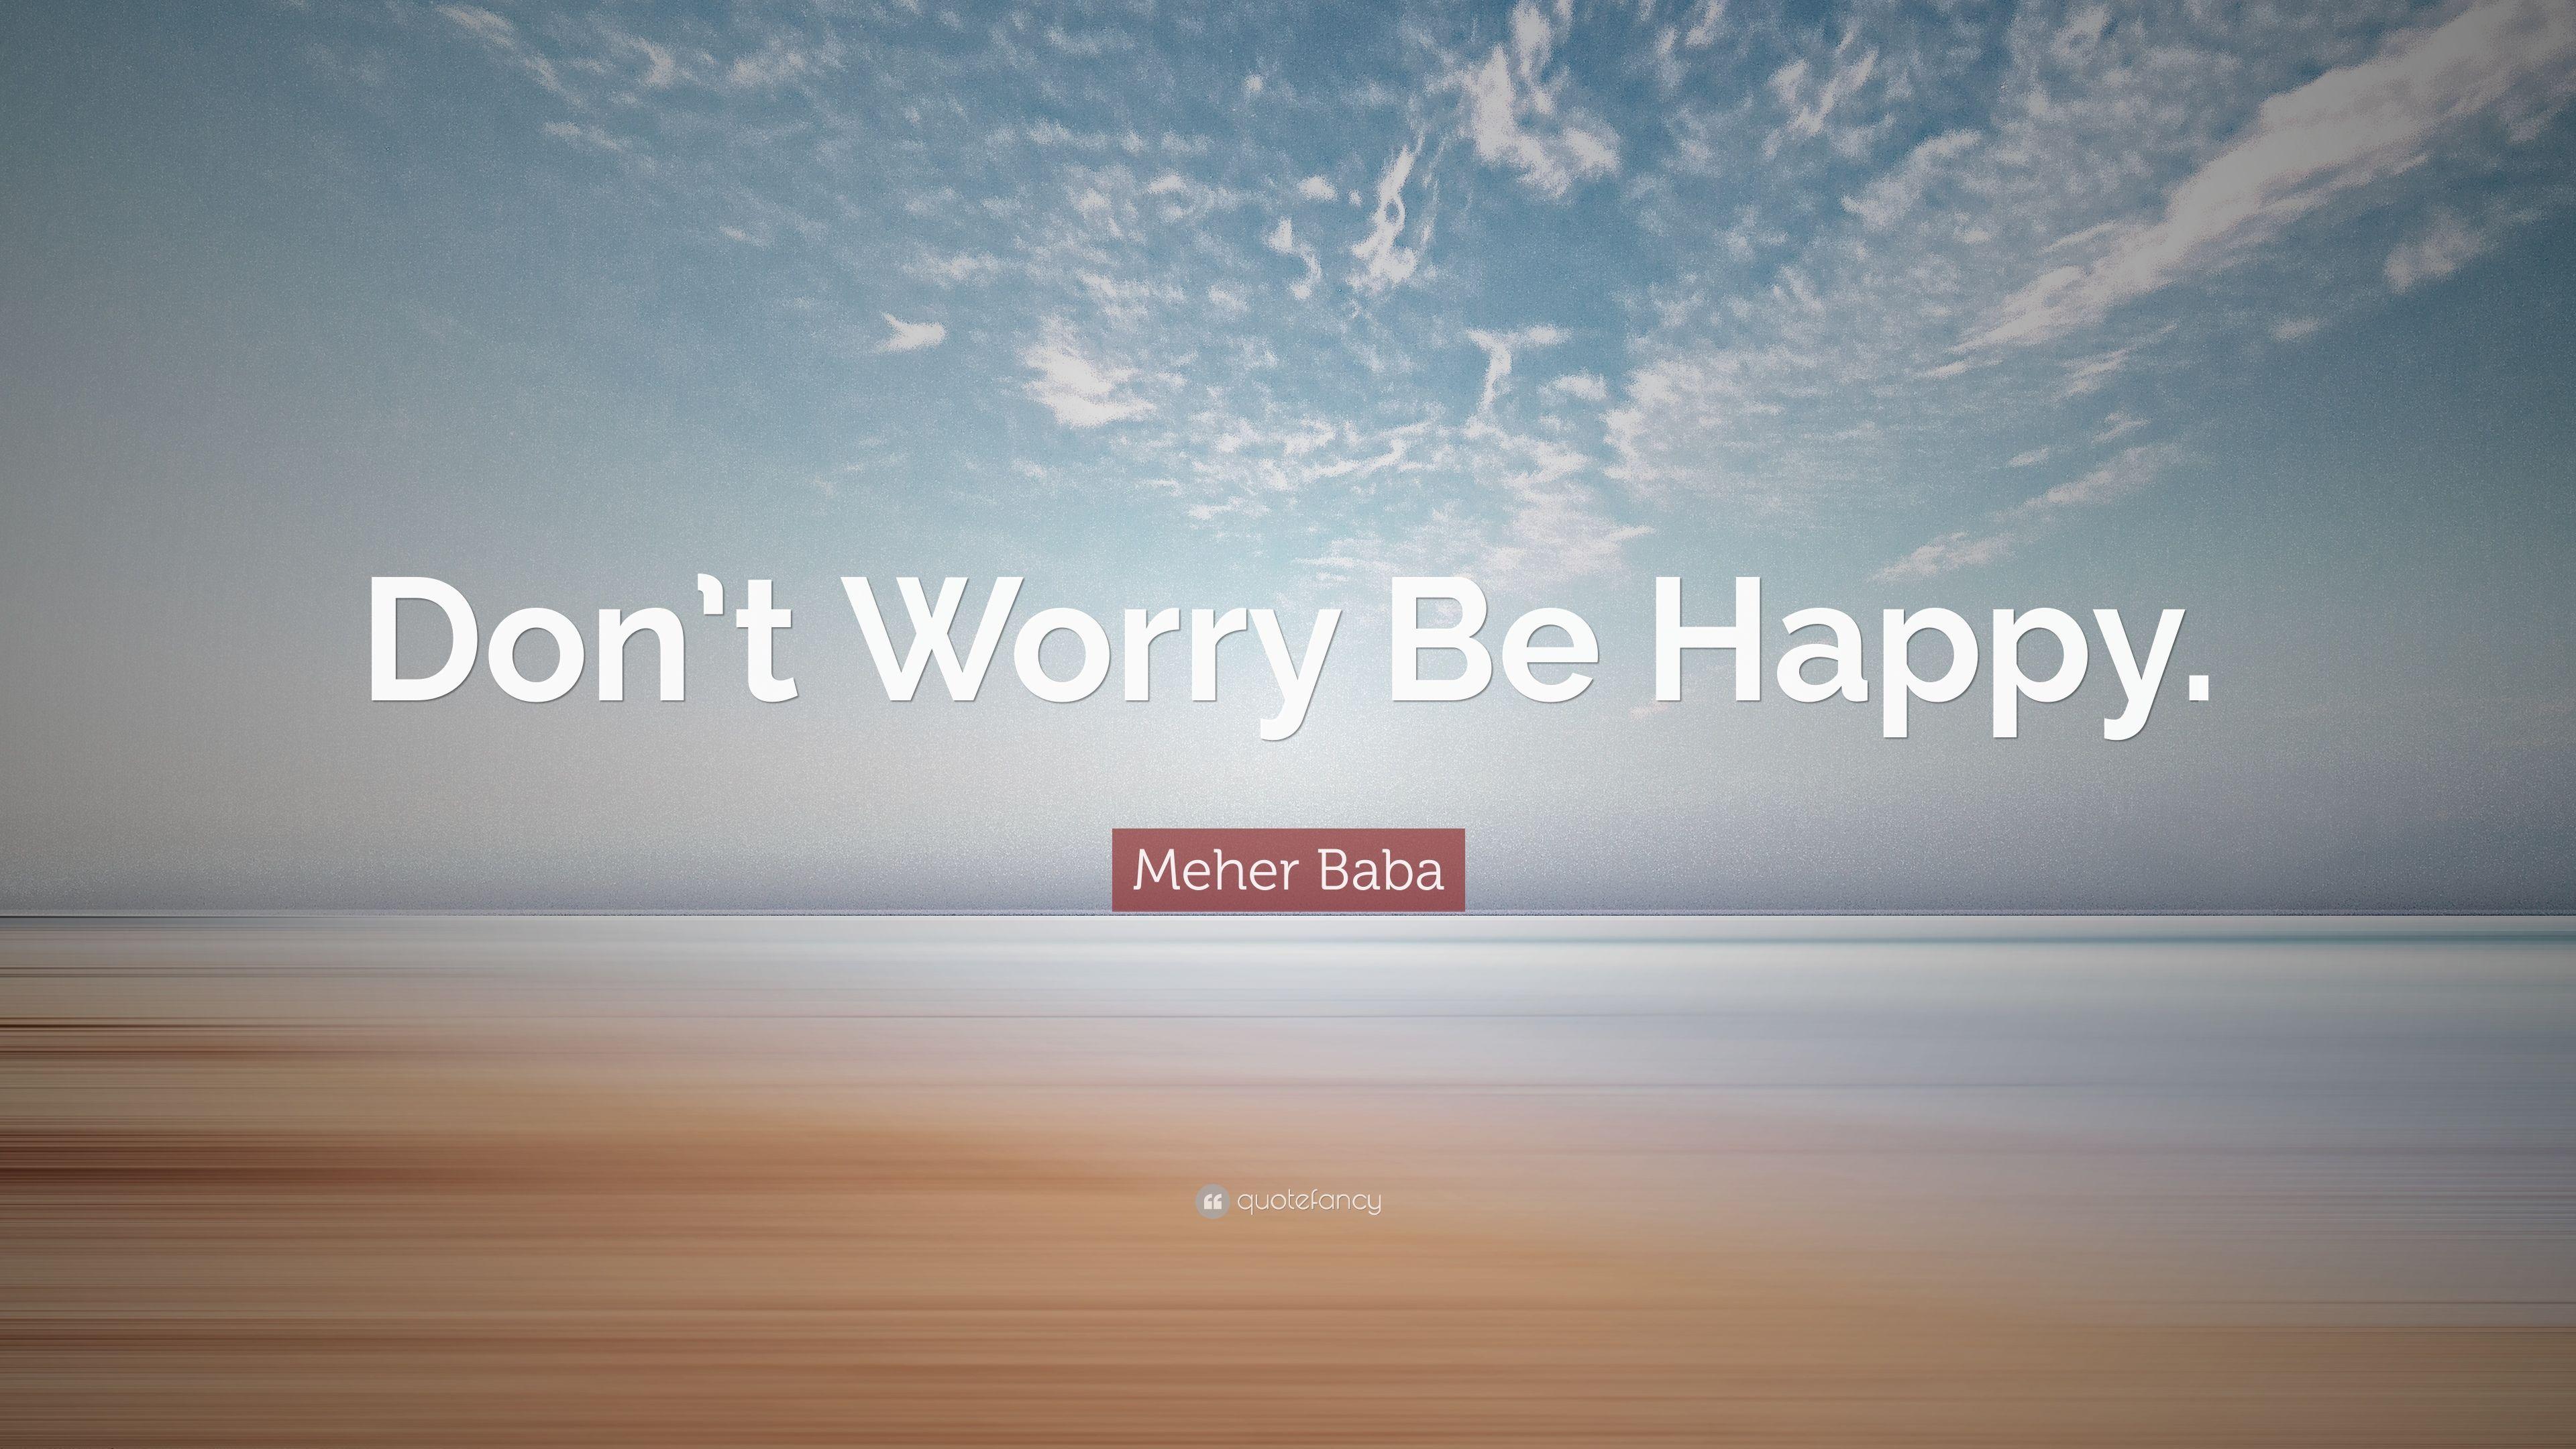 Meher Baba Quote: “Don't Worry Be Happy.” (12 wallpaper)